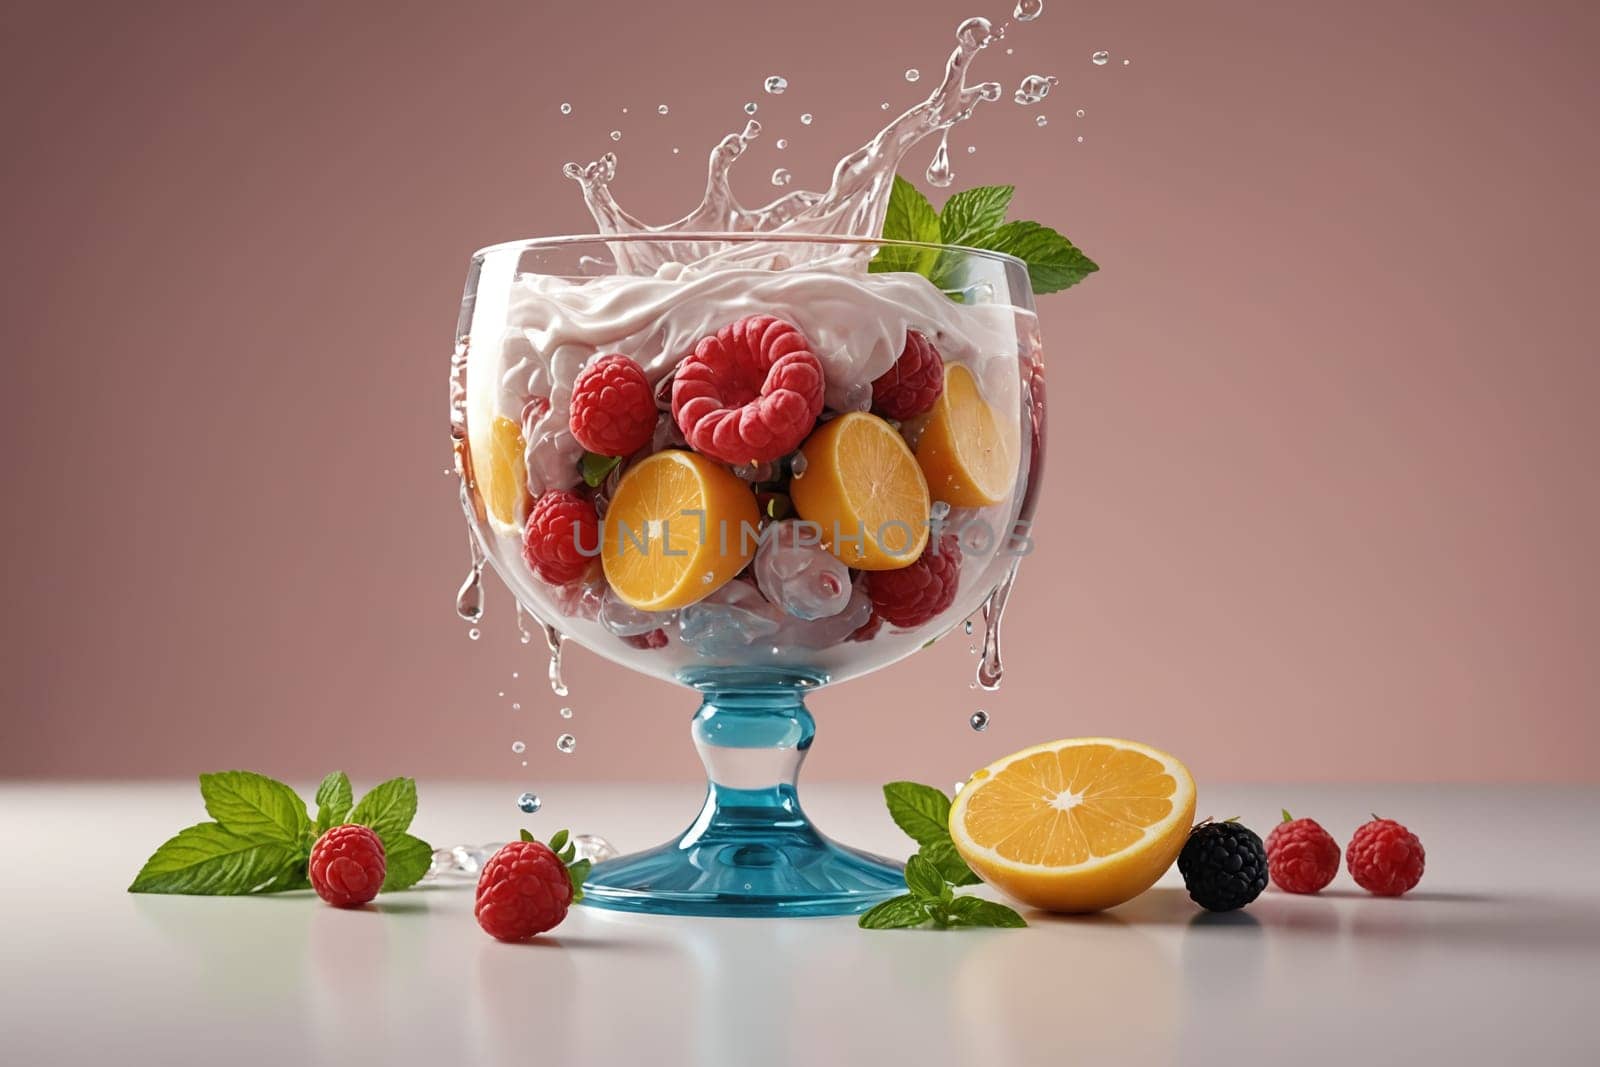 A vibrant cup filled with oranges, raspberries, and mint leaves, captured mid-splash for a refreshing feel.